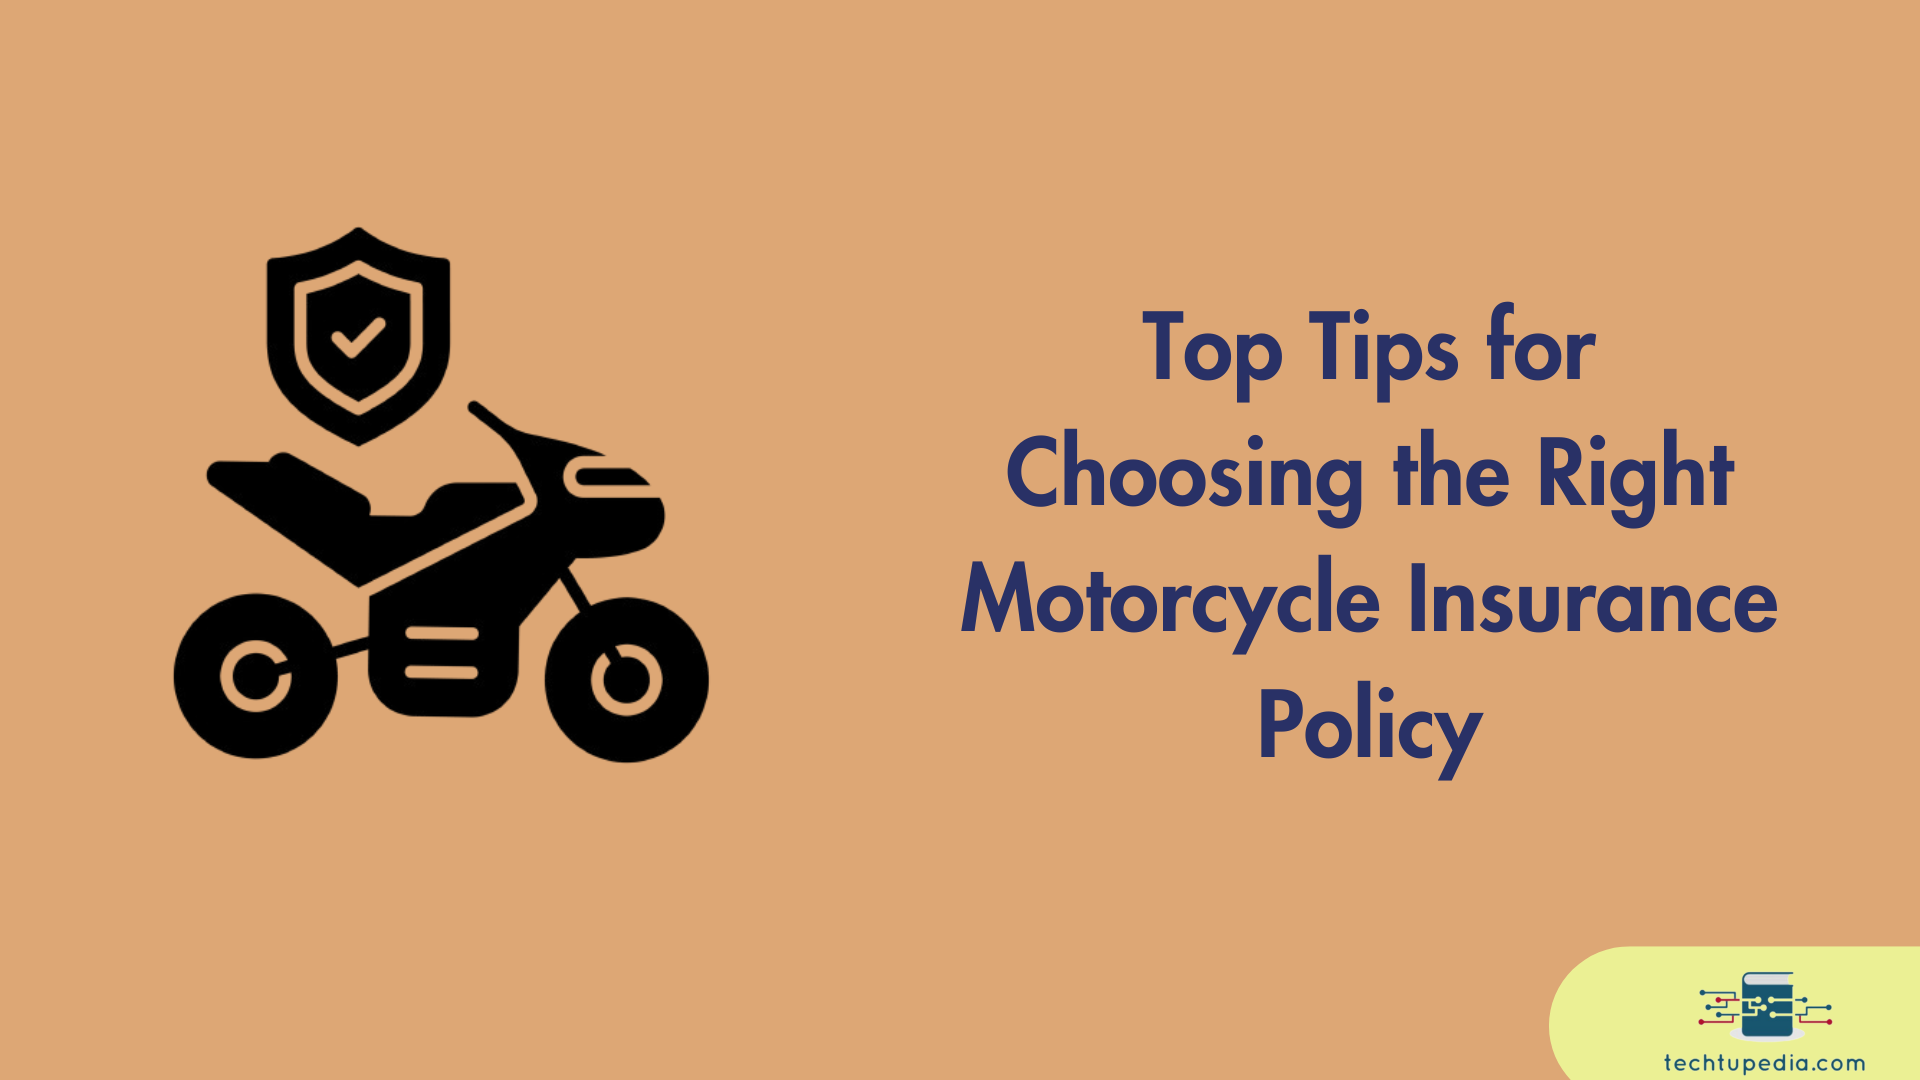 Top Tips for Choosing the Right Motorcycle Insurance Policy